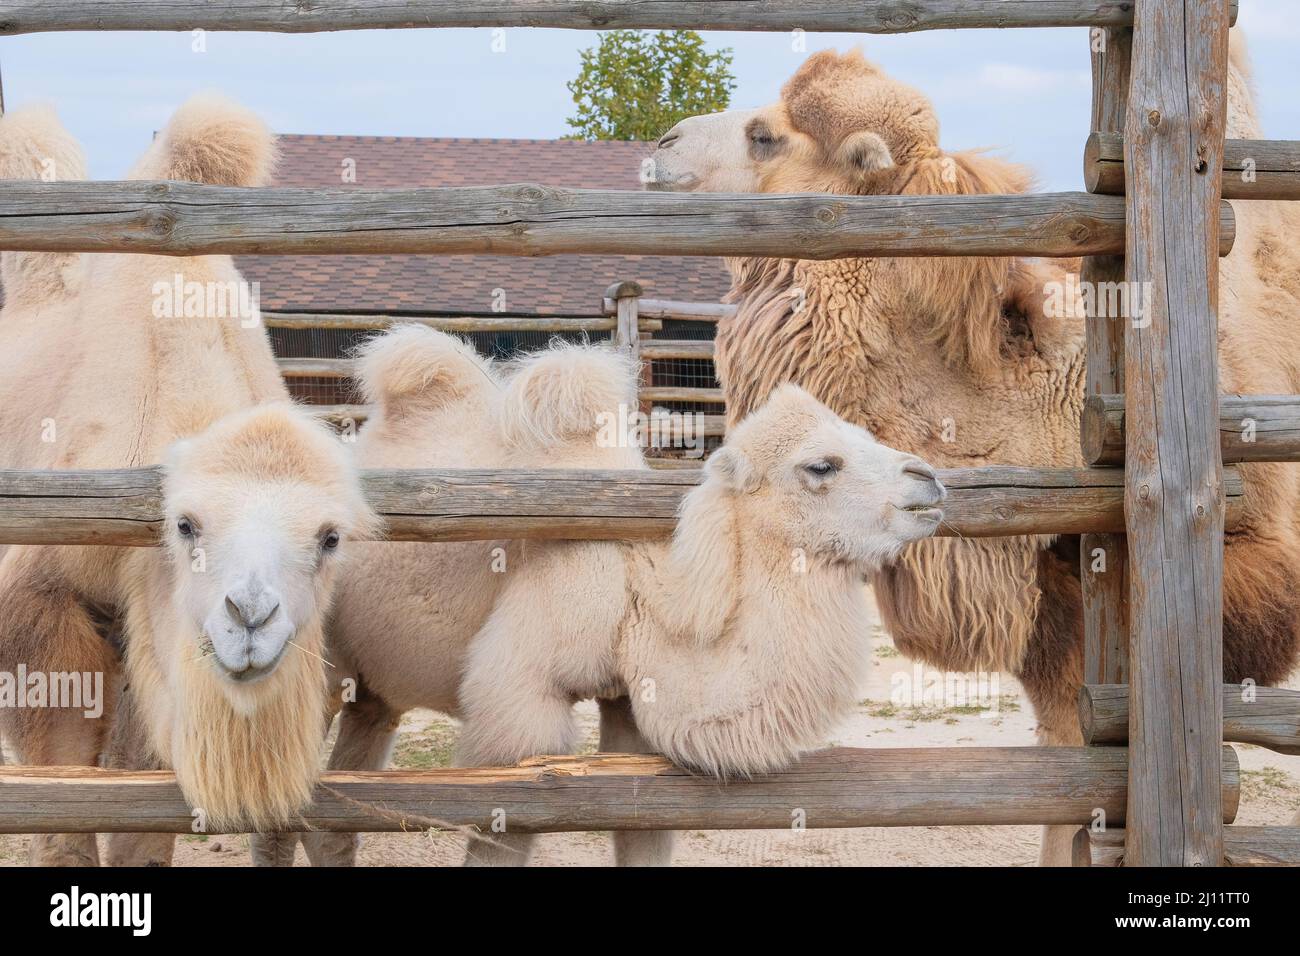 Camel family eating hay at the zoo, close up. Keeping wild animals in zoological parks. Stock Photo